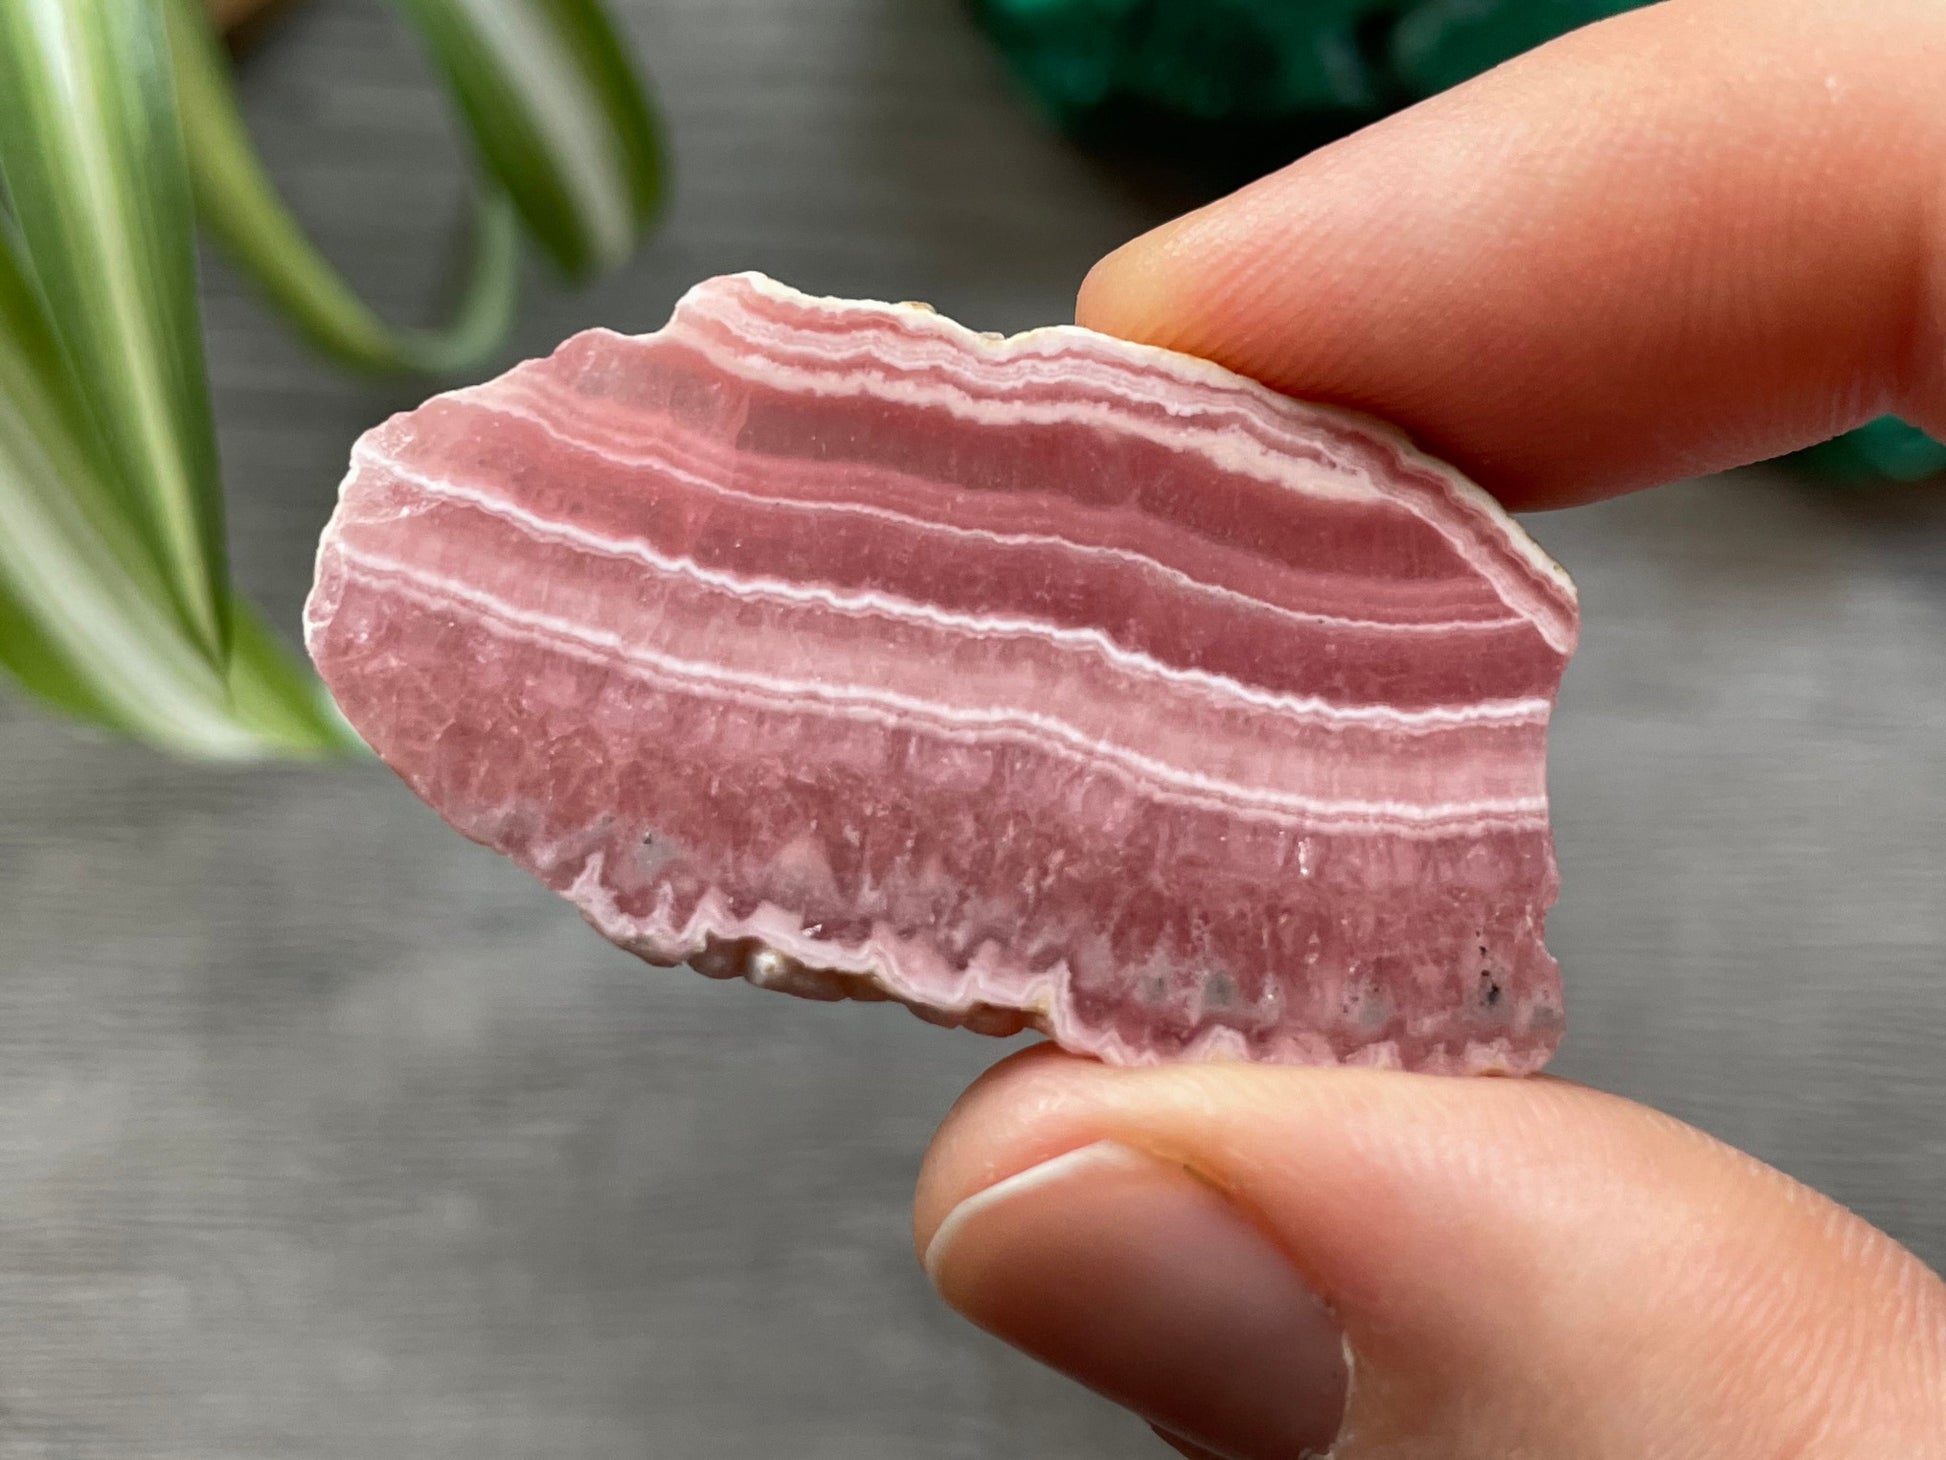 Pictured is a small slab of rhodochrosite.